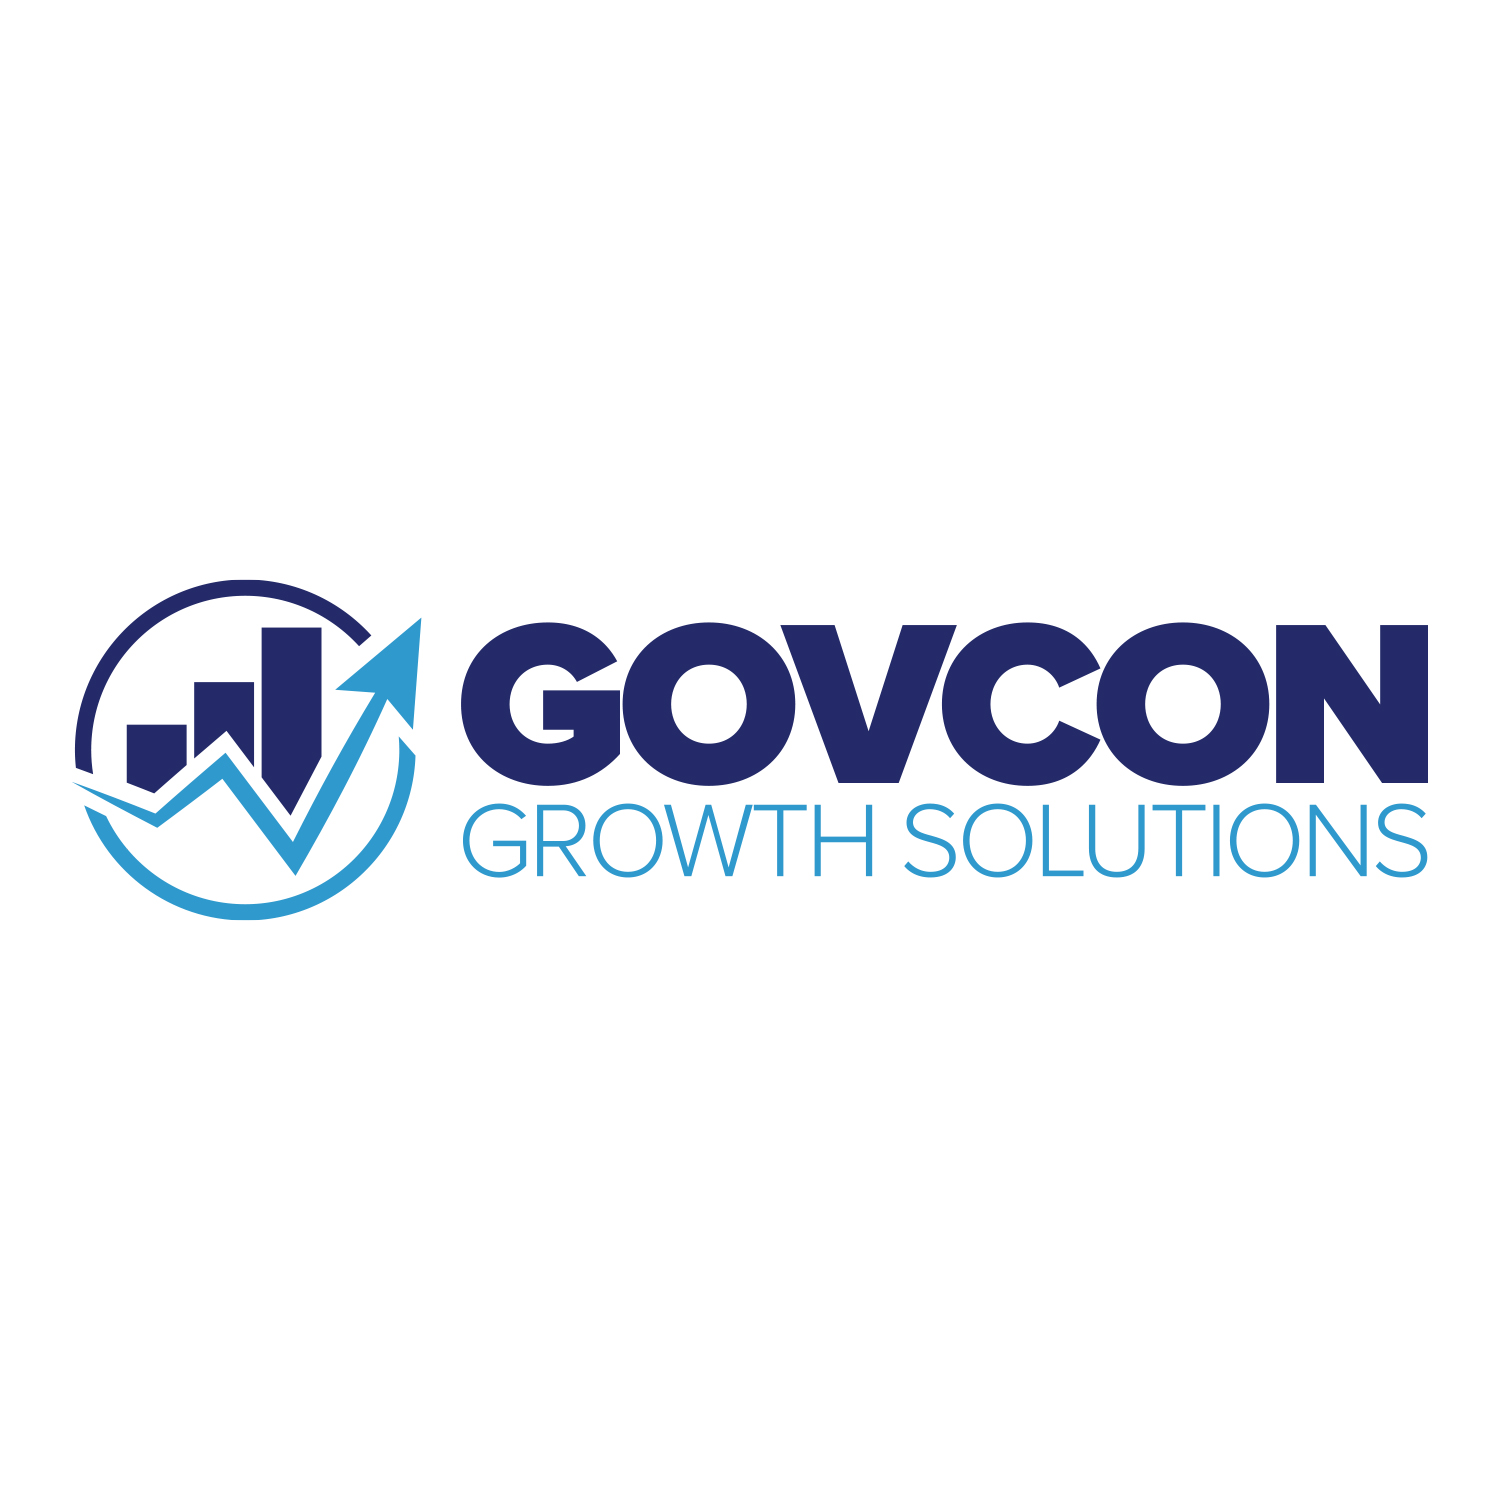 Govcon Growth Solutions logo